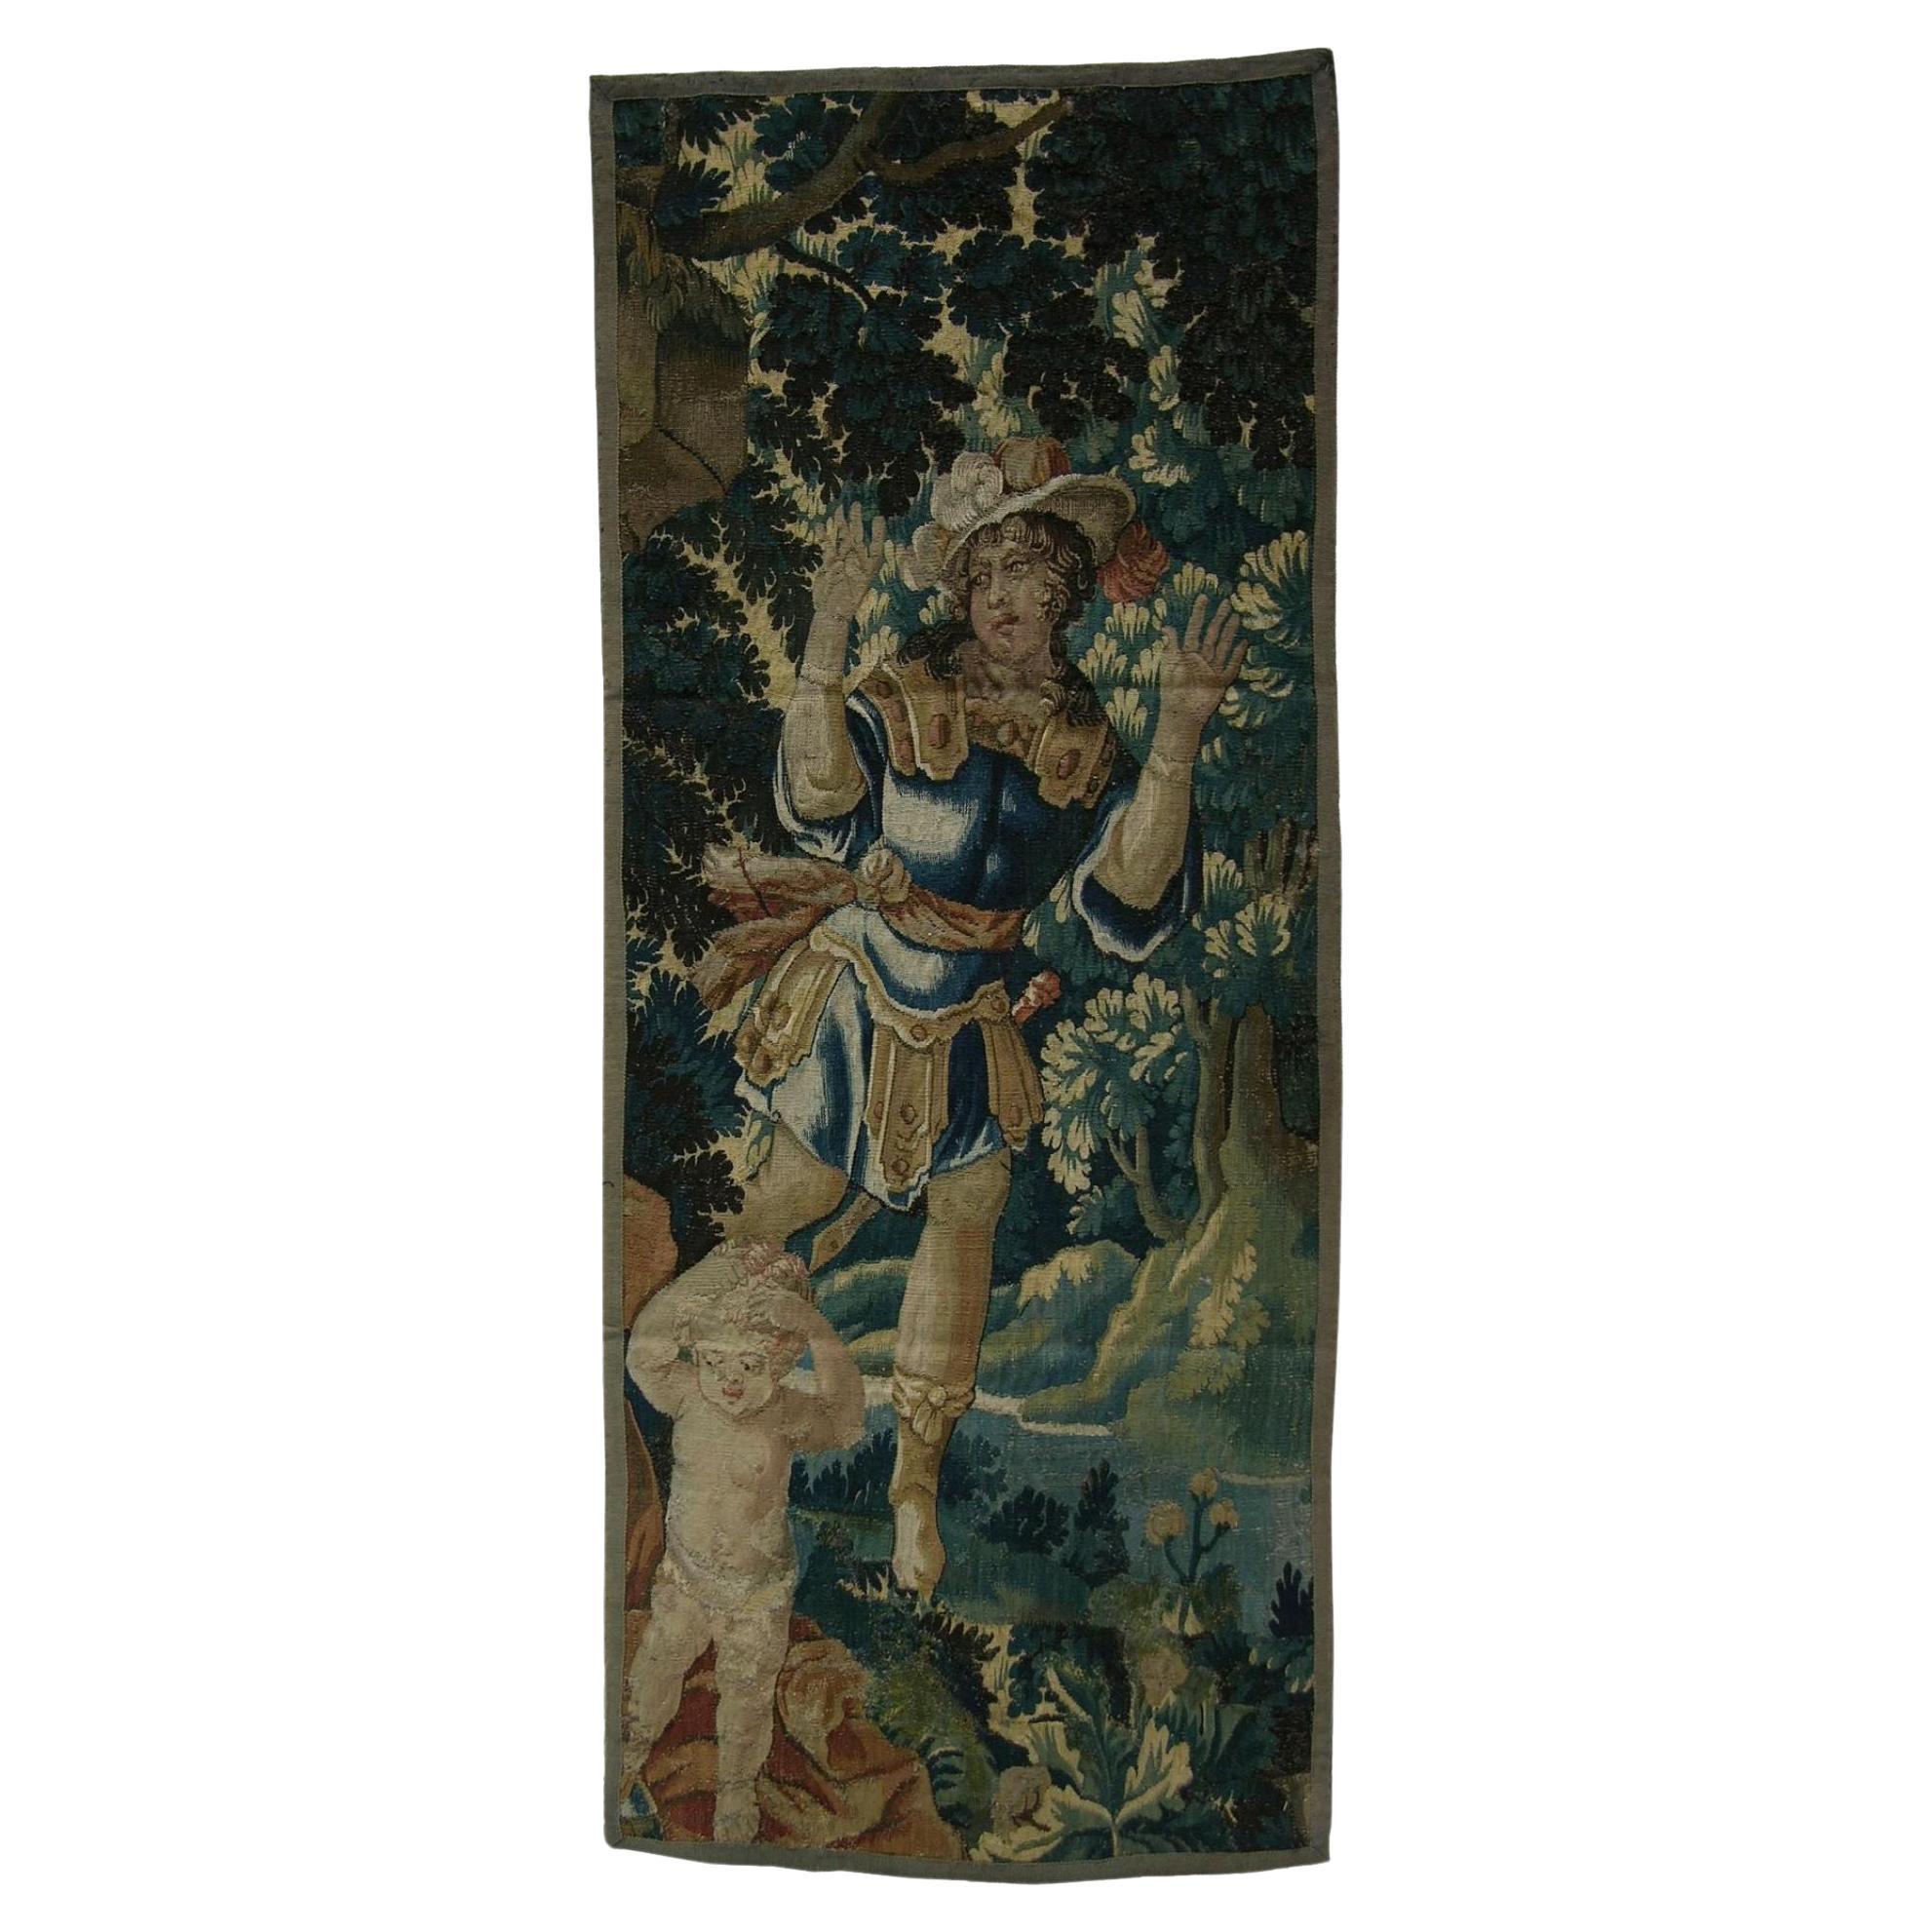 Antique 17th Century Flemish Tapestry 6'7" X 2'9" For Sale